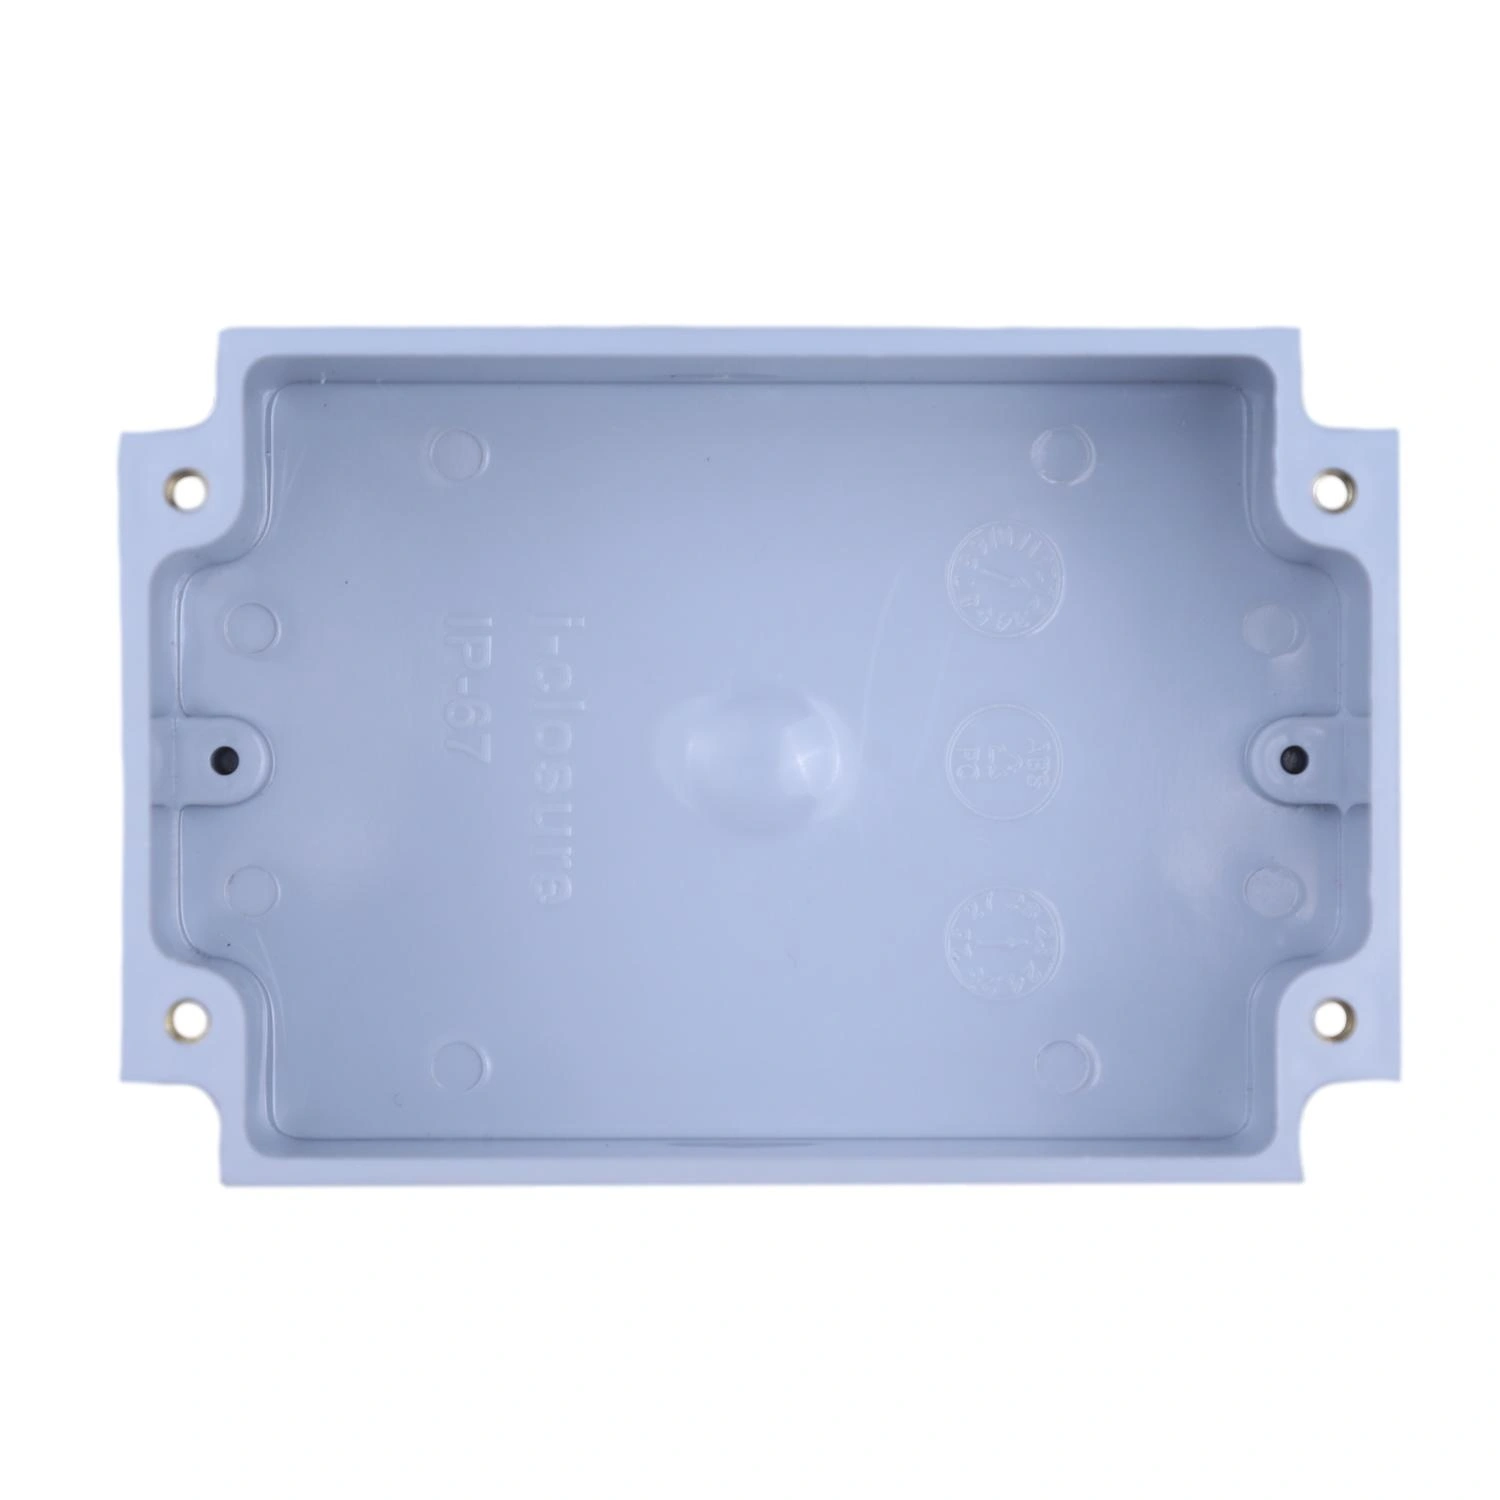 ABS Enclosure 120 x 80 x 85 mm Clear IP67-1